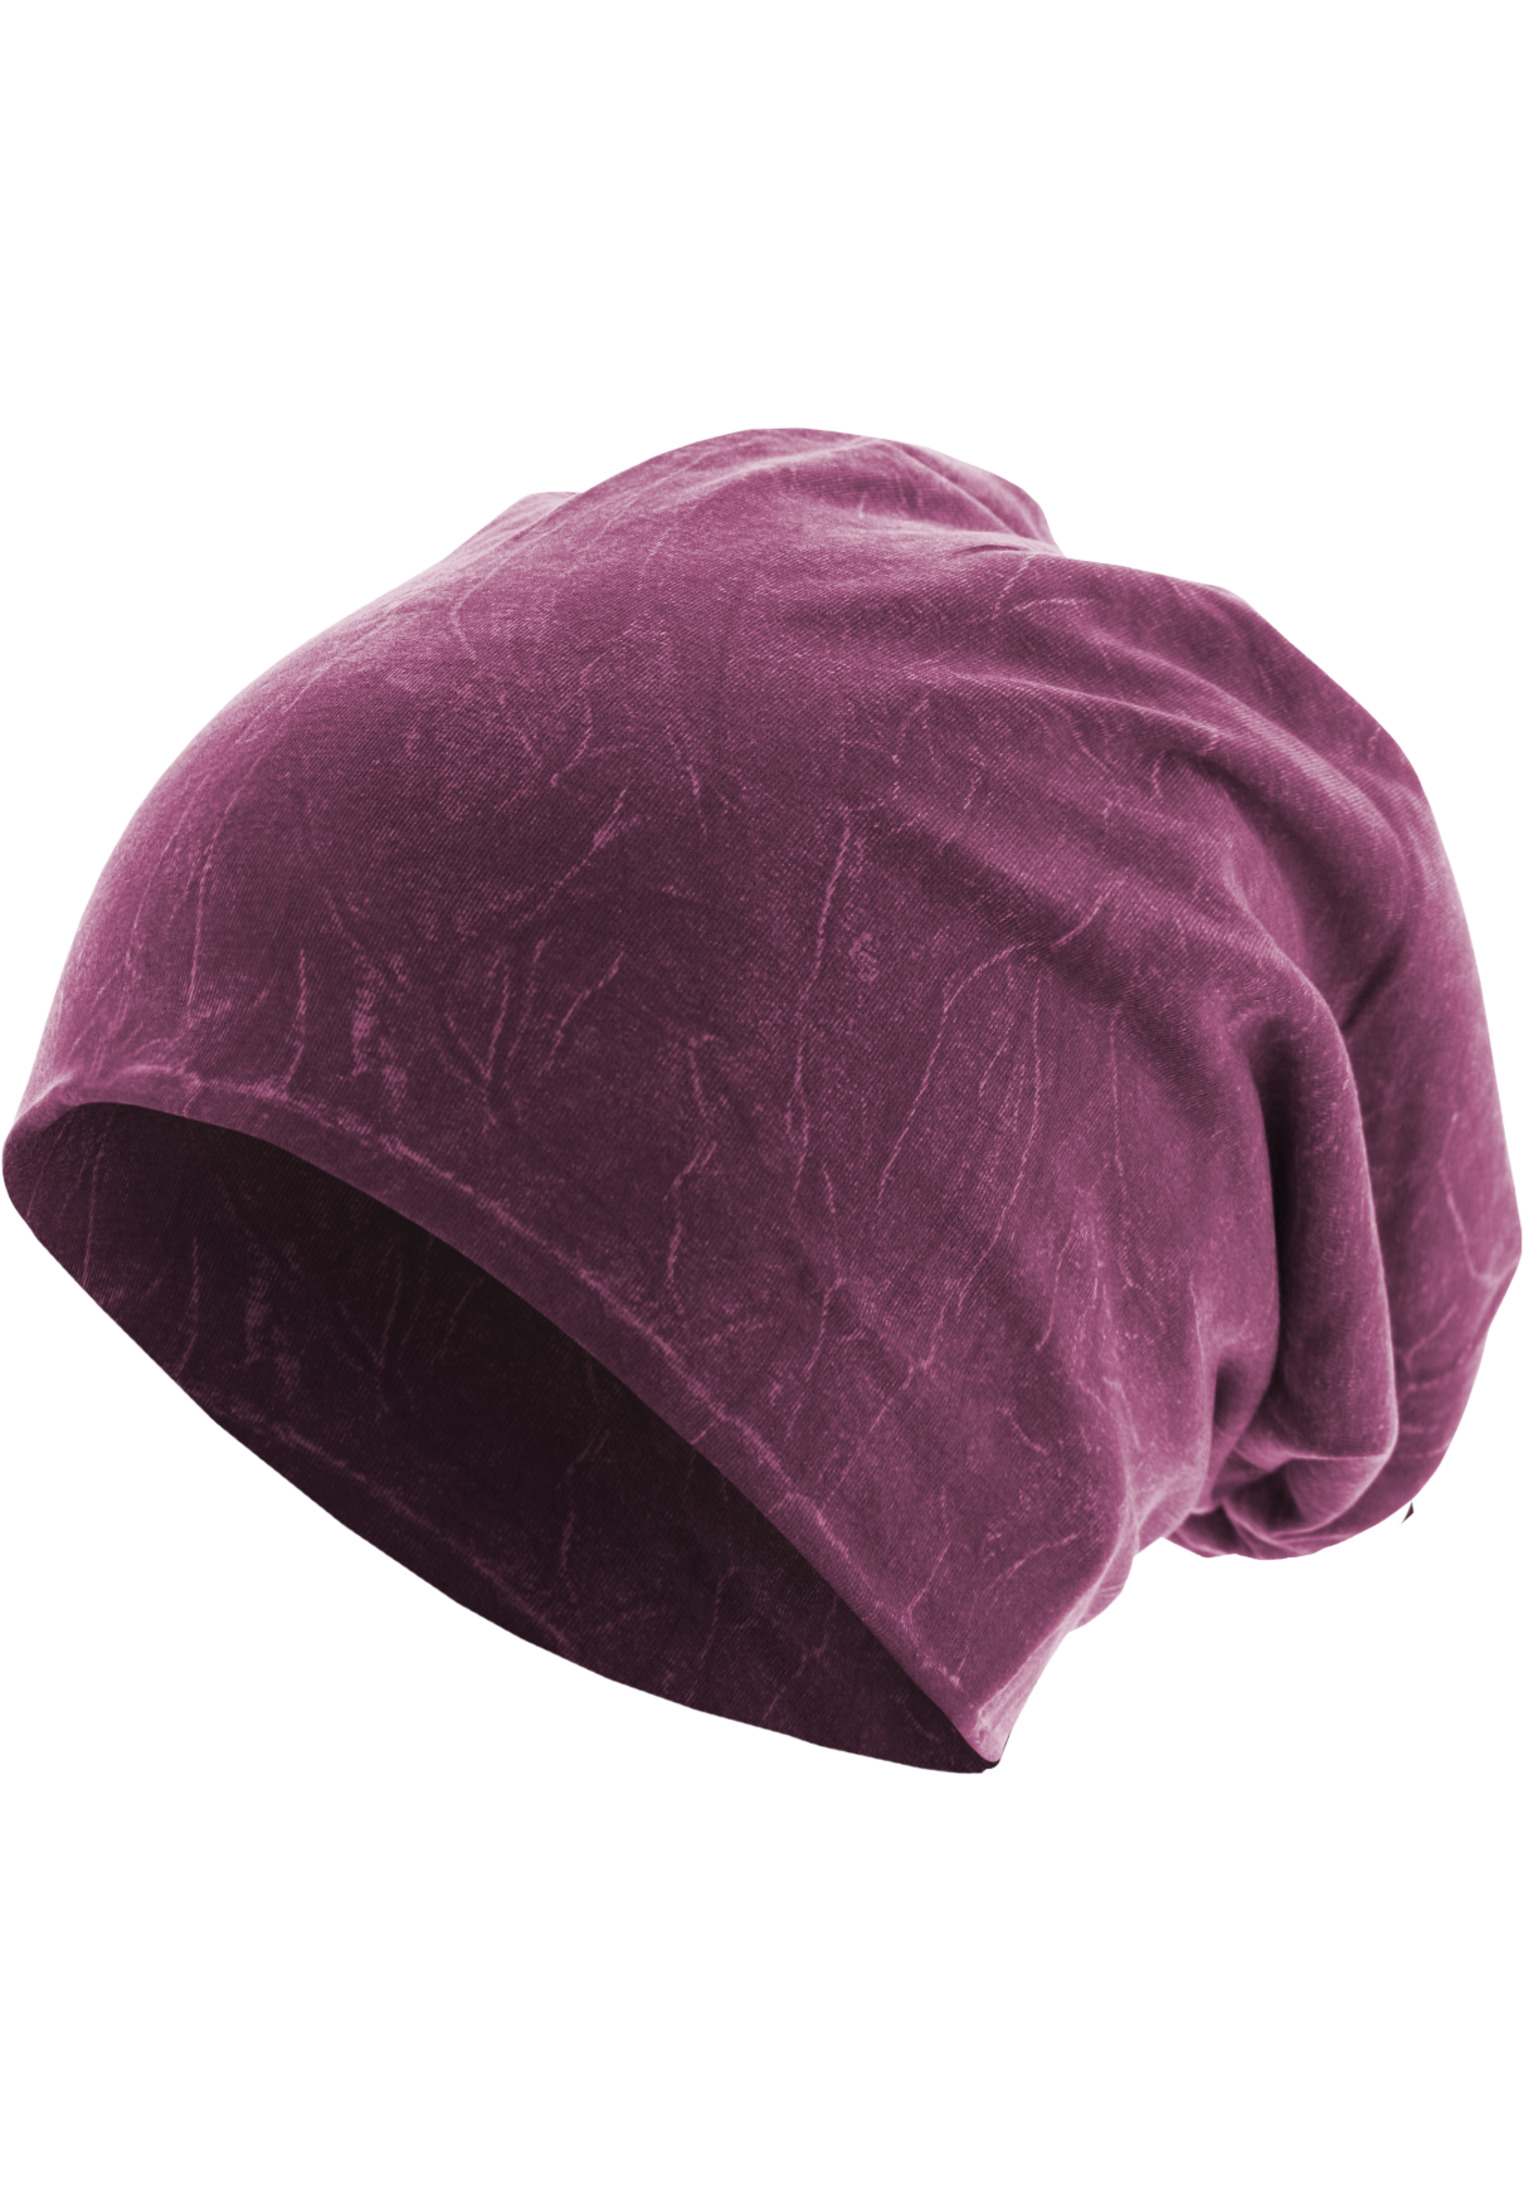 Caps & Beanies Stonewashed Jersey Beanie in Farbe purple